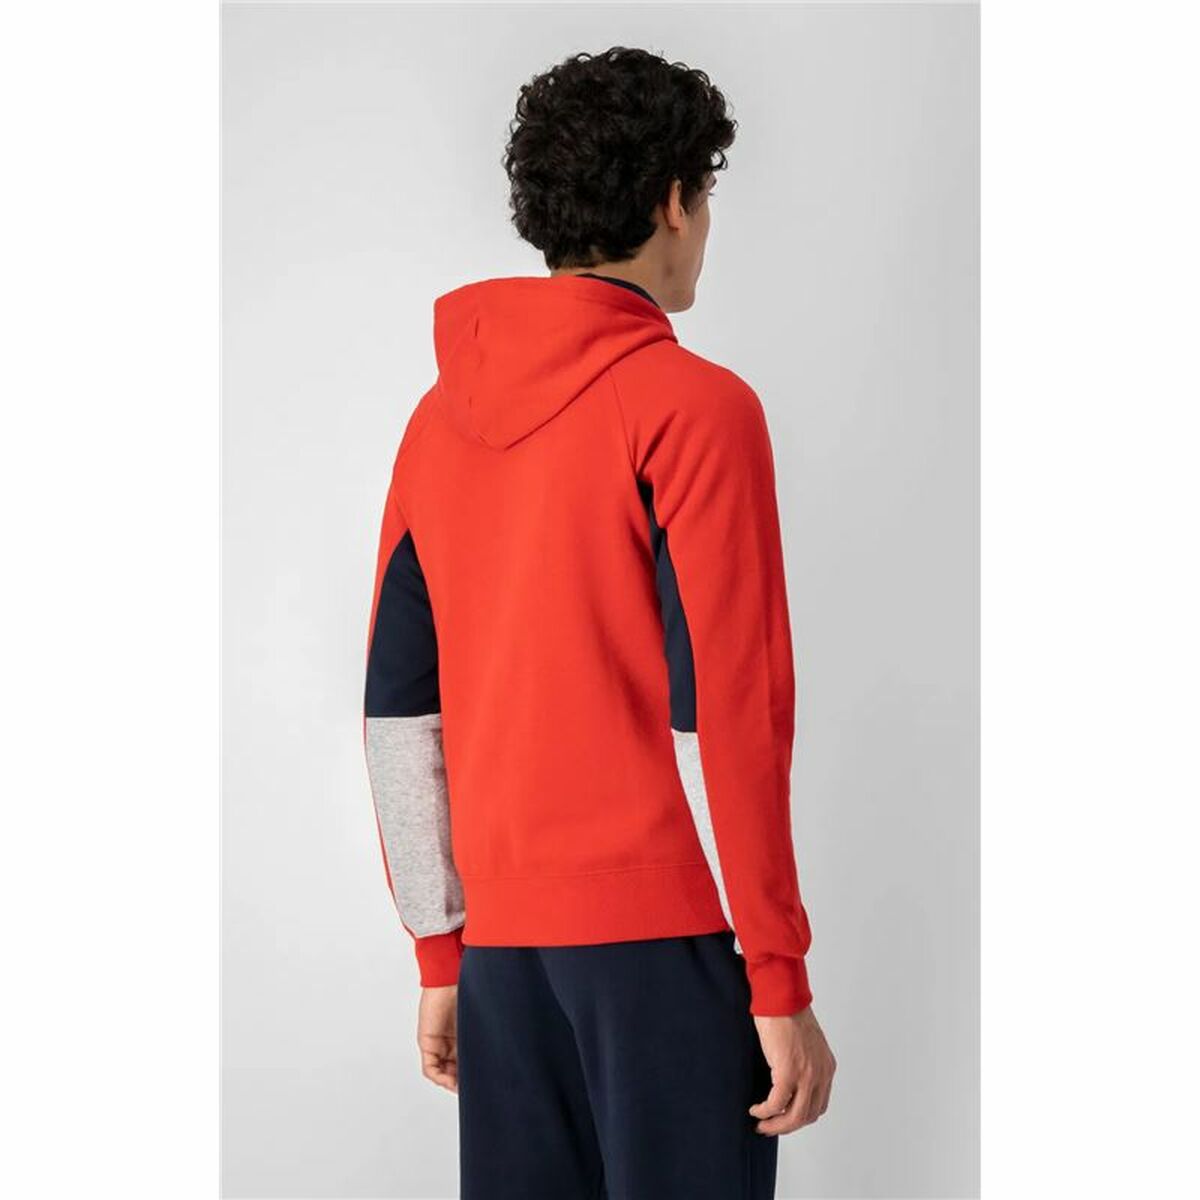 Tracksuit for Adults Champion Red With hood